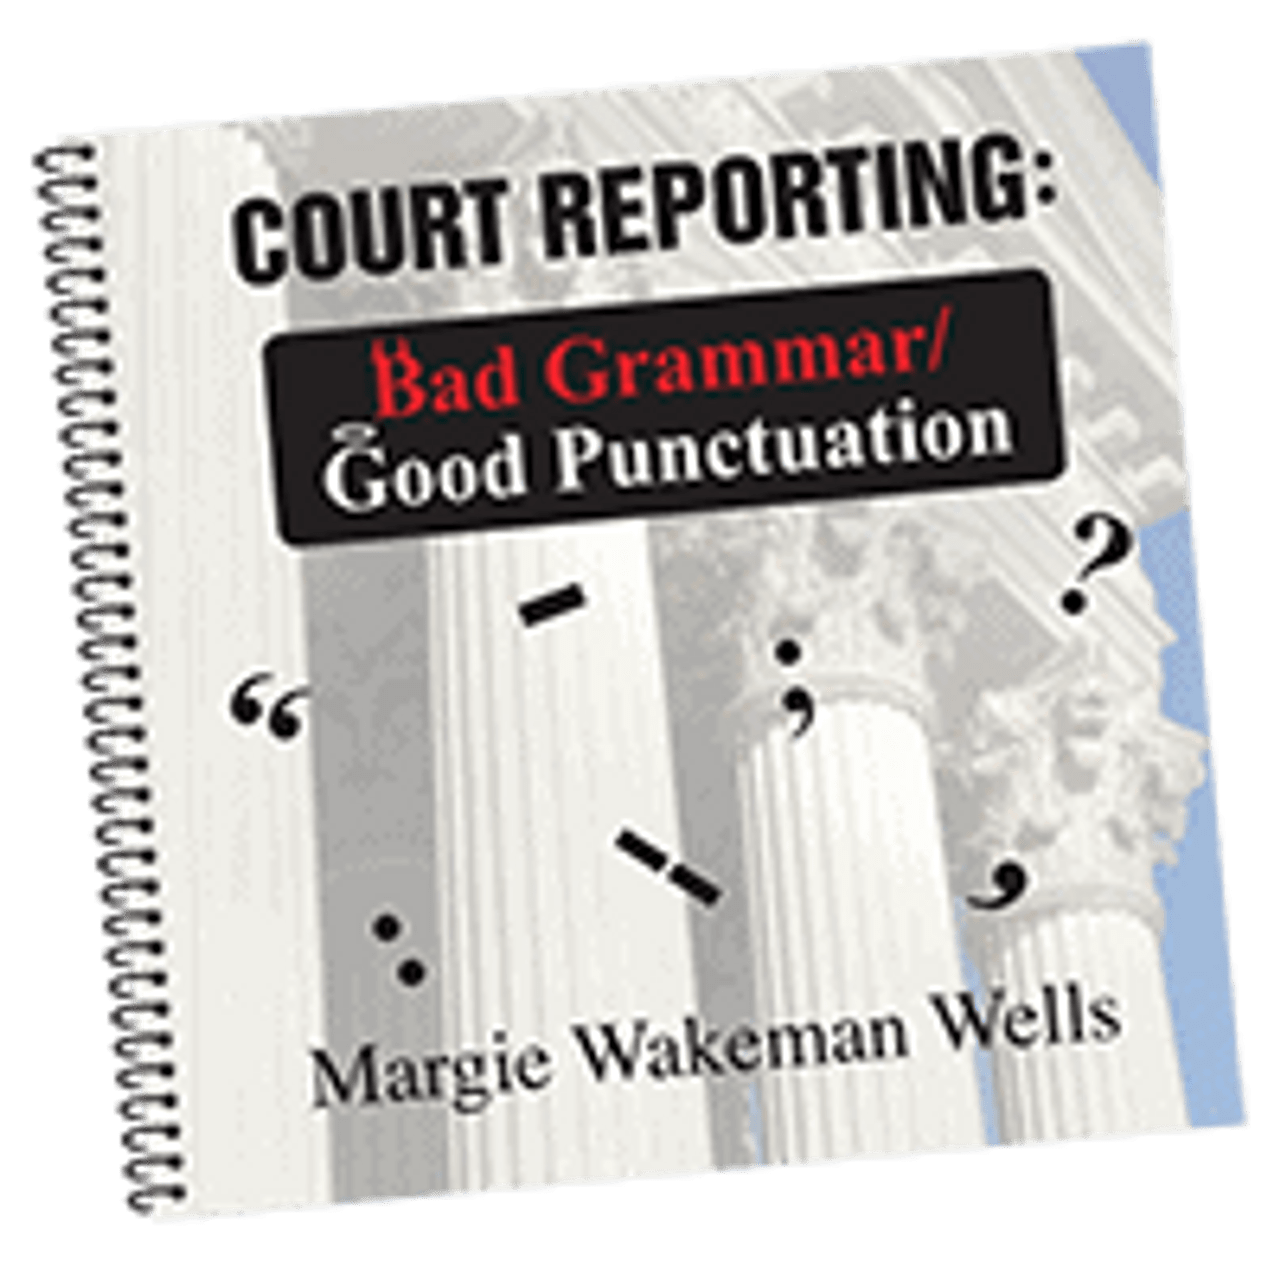 condition　Punctuation　Reporting:　The　Bad　StenoWorks　Court　Reporting　Very　Grammar/Good　Court　Good　Store